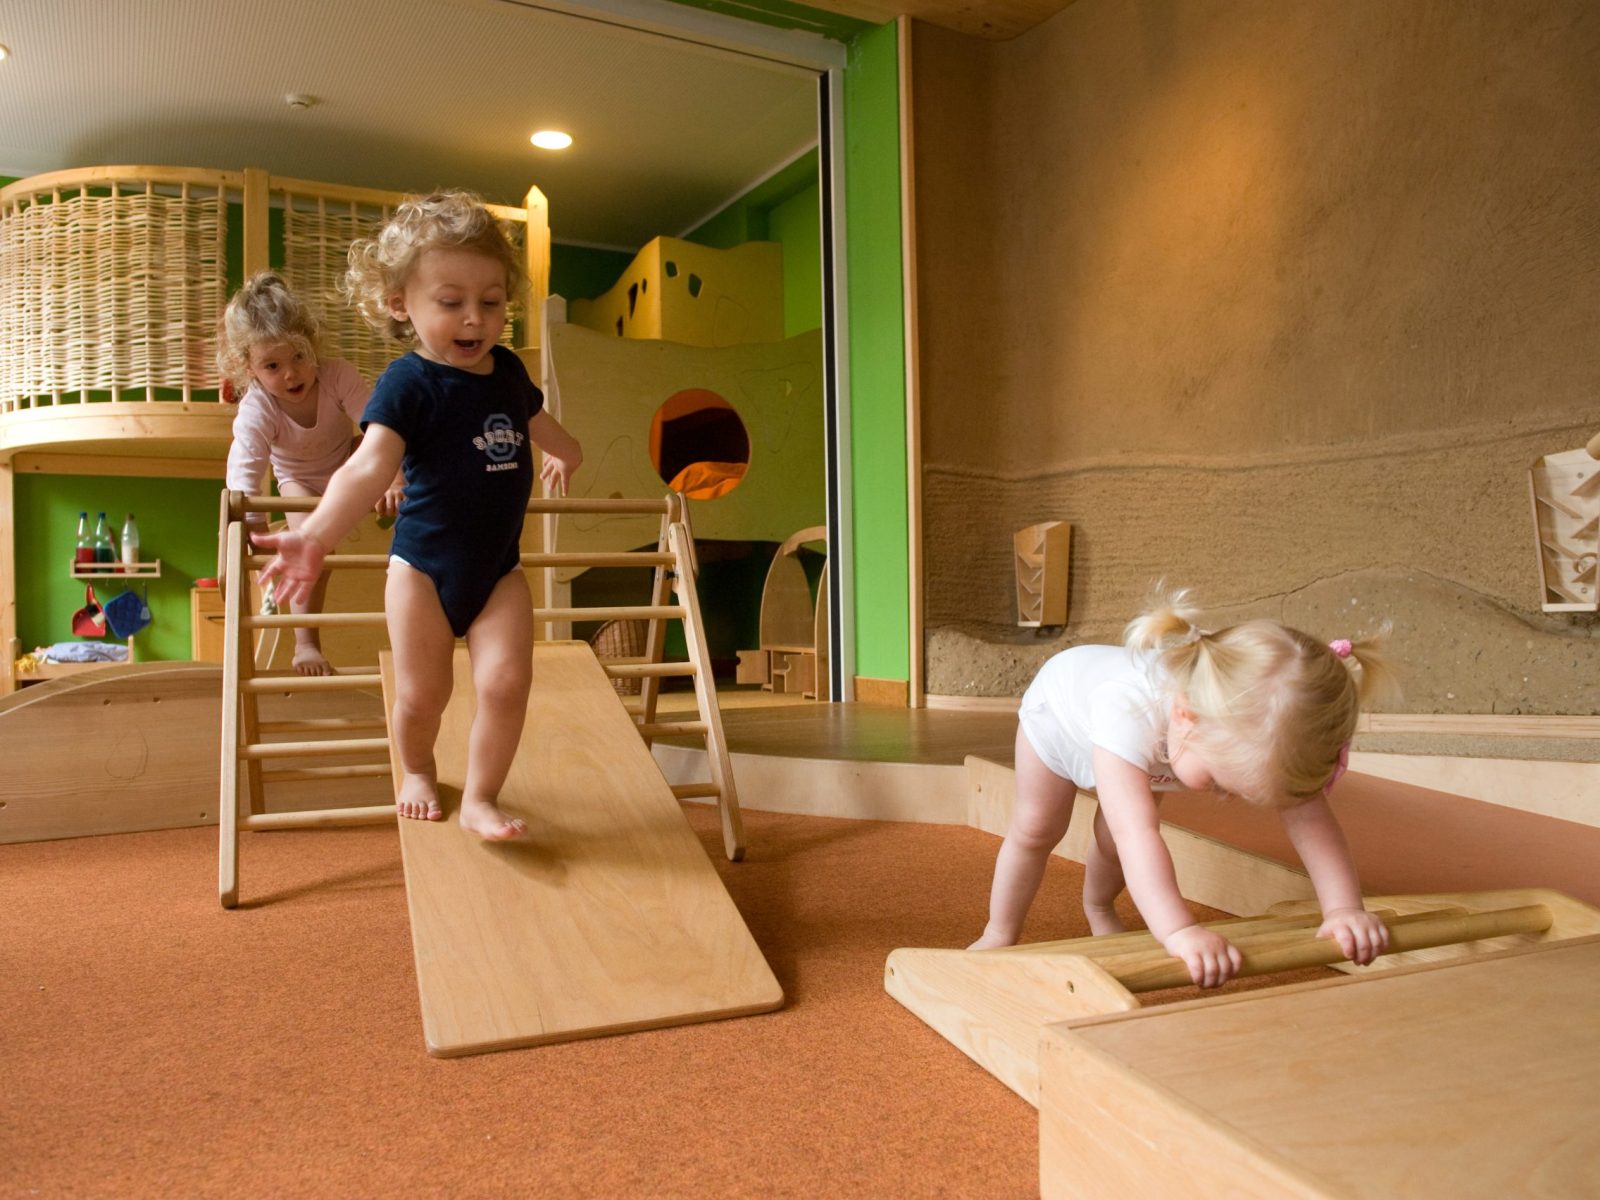 Children climb and run on Pikler devices